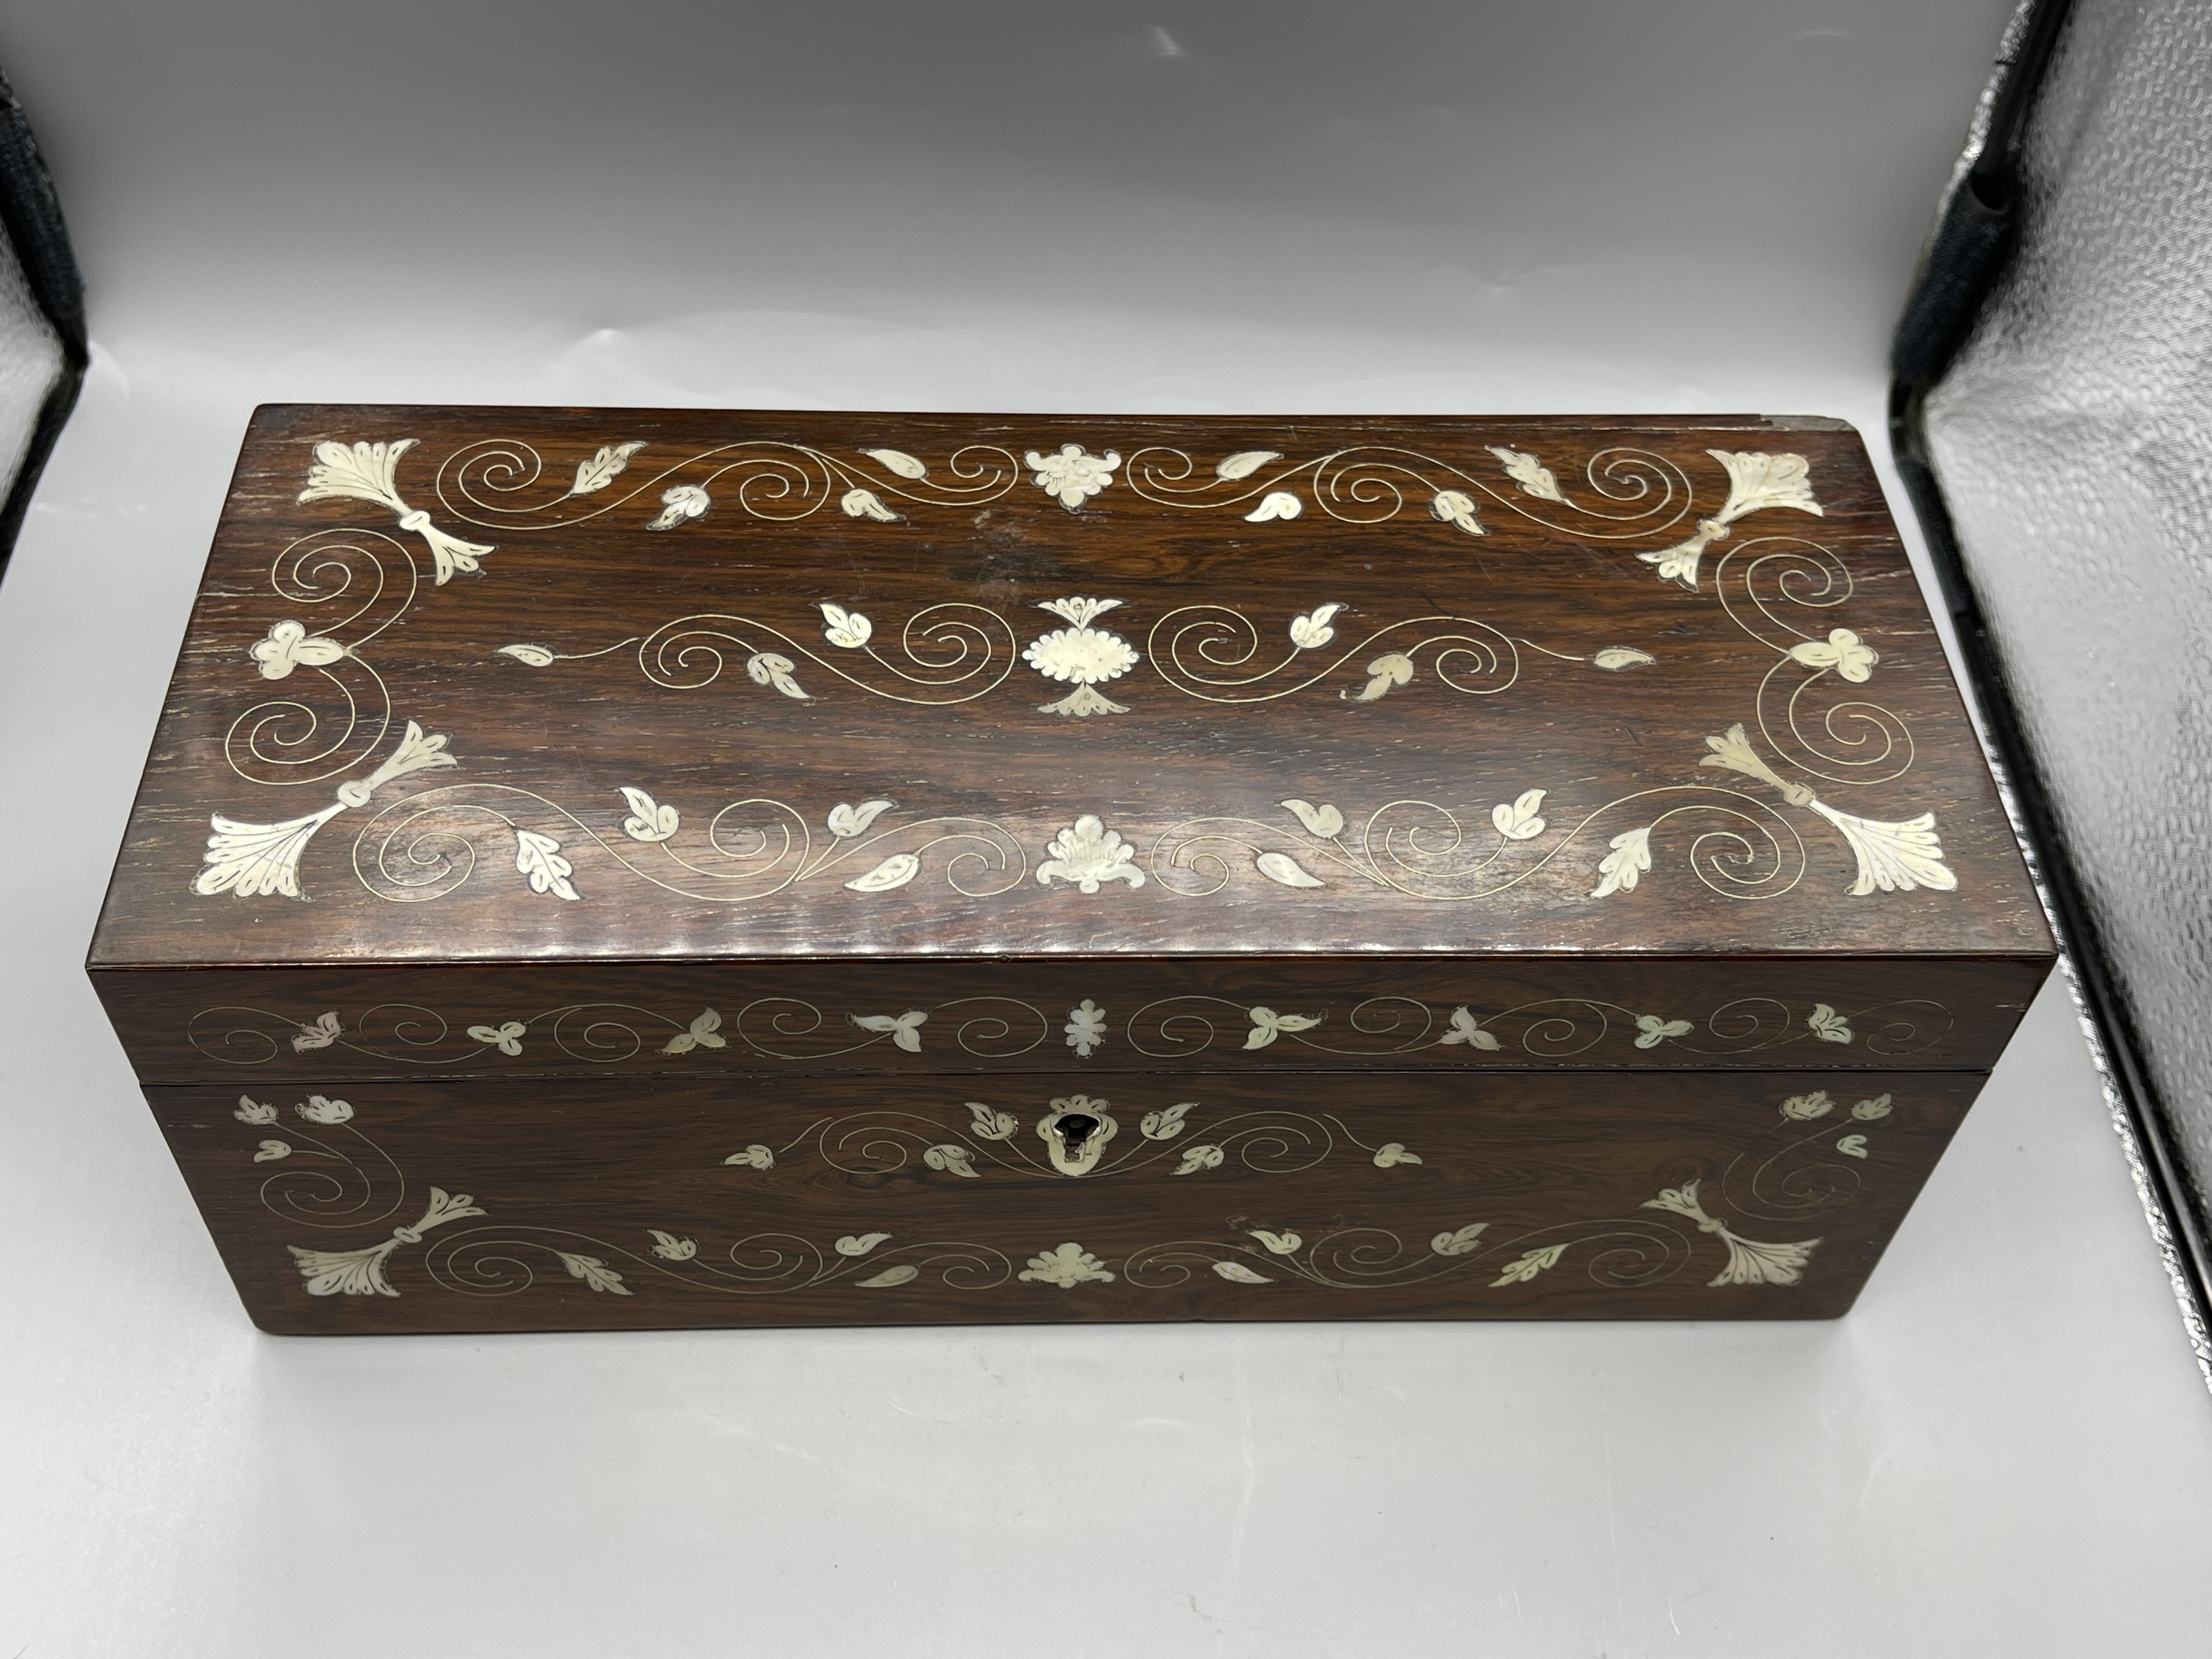 Rosewood Box in lovely condition for age along wit - Image 6 of 13